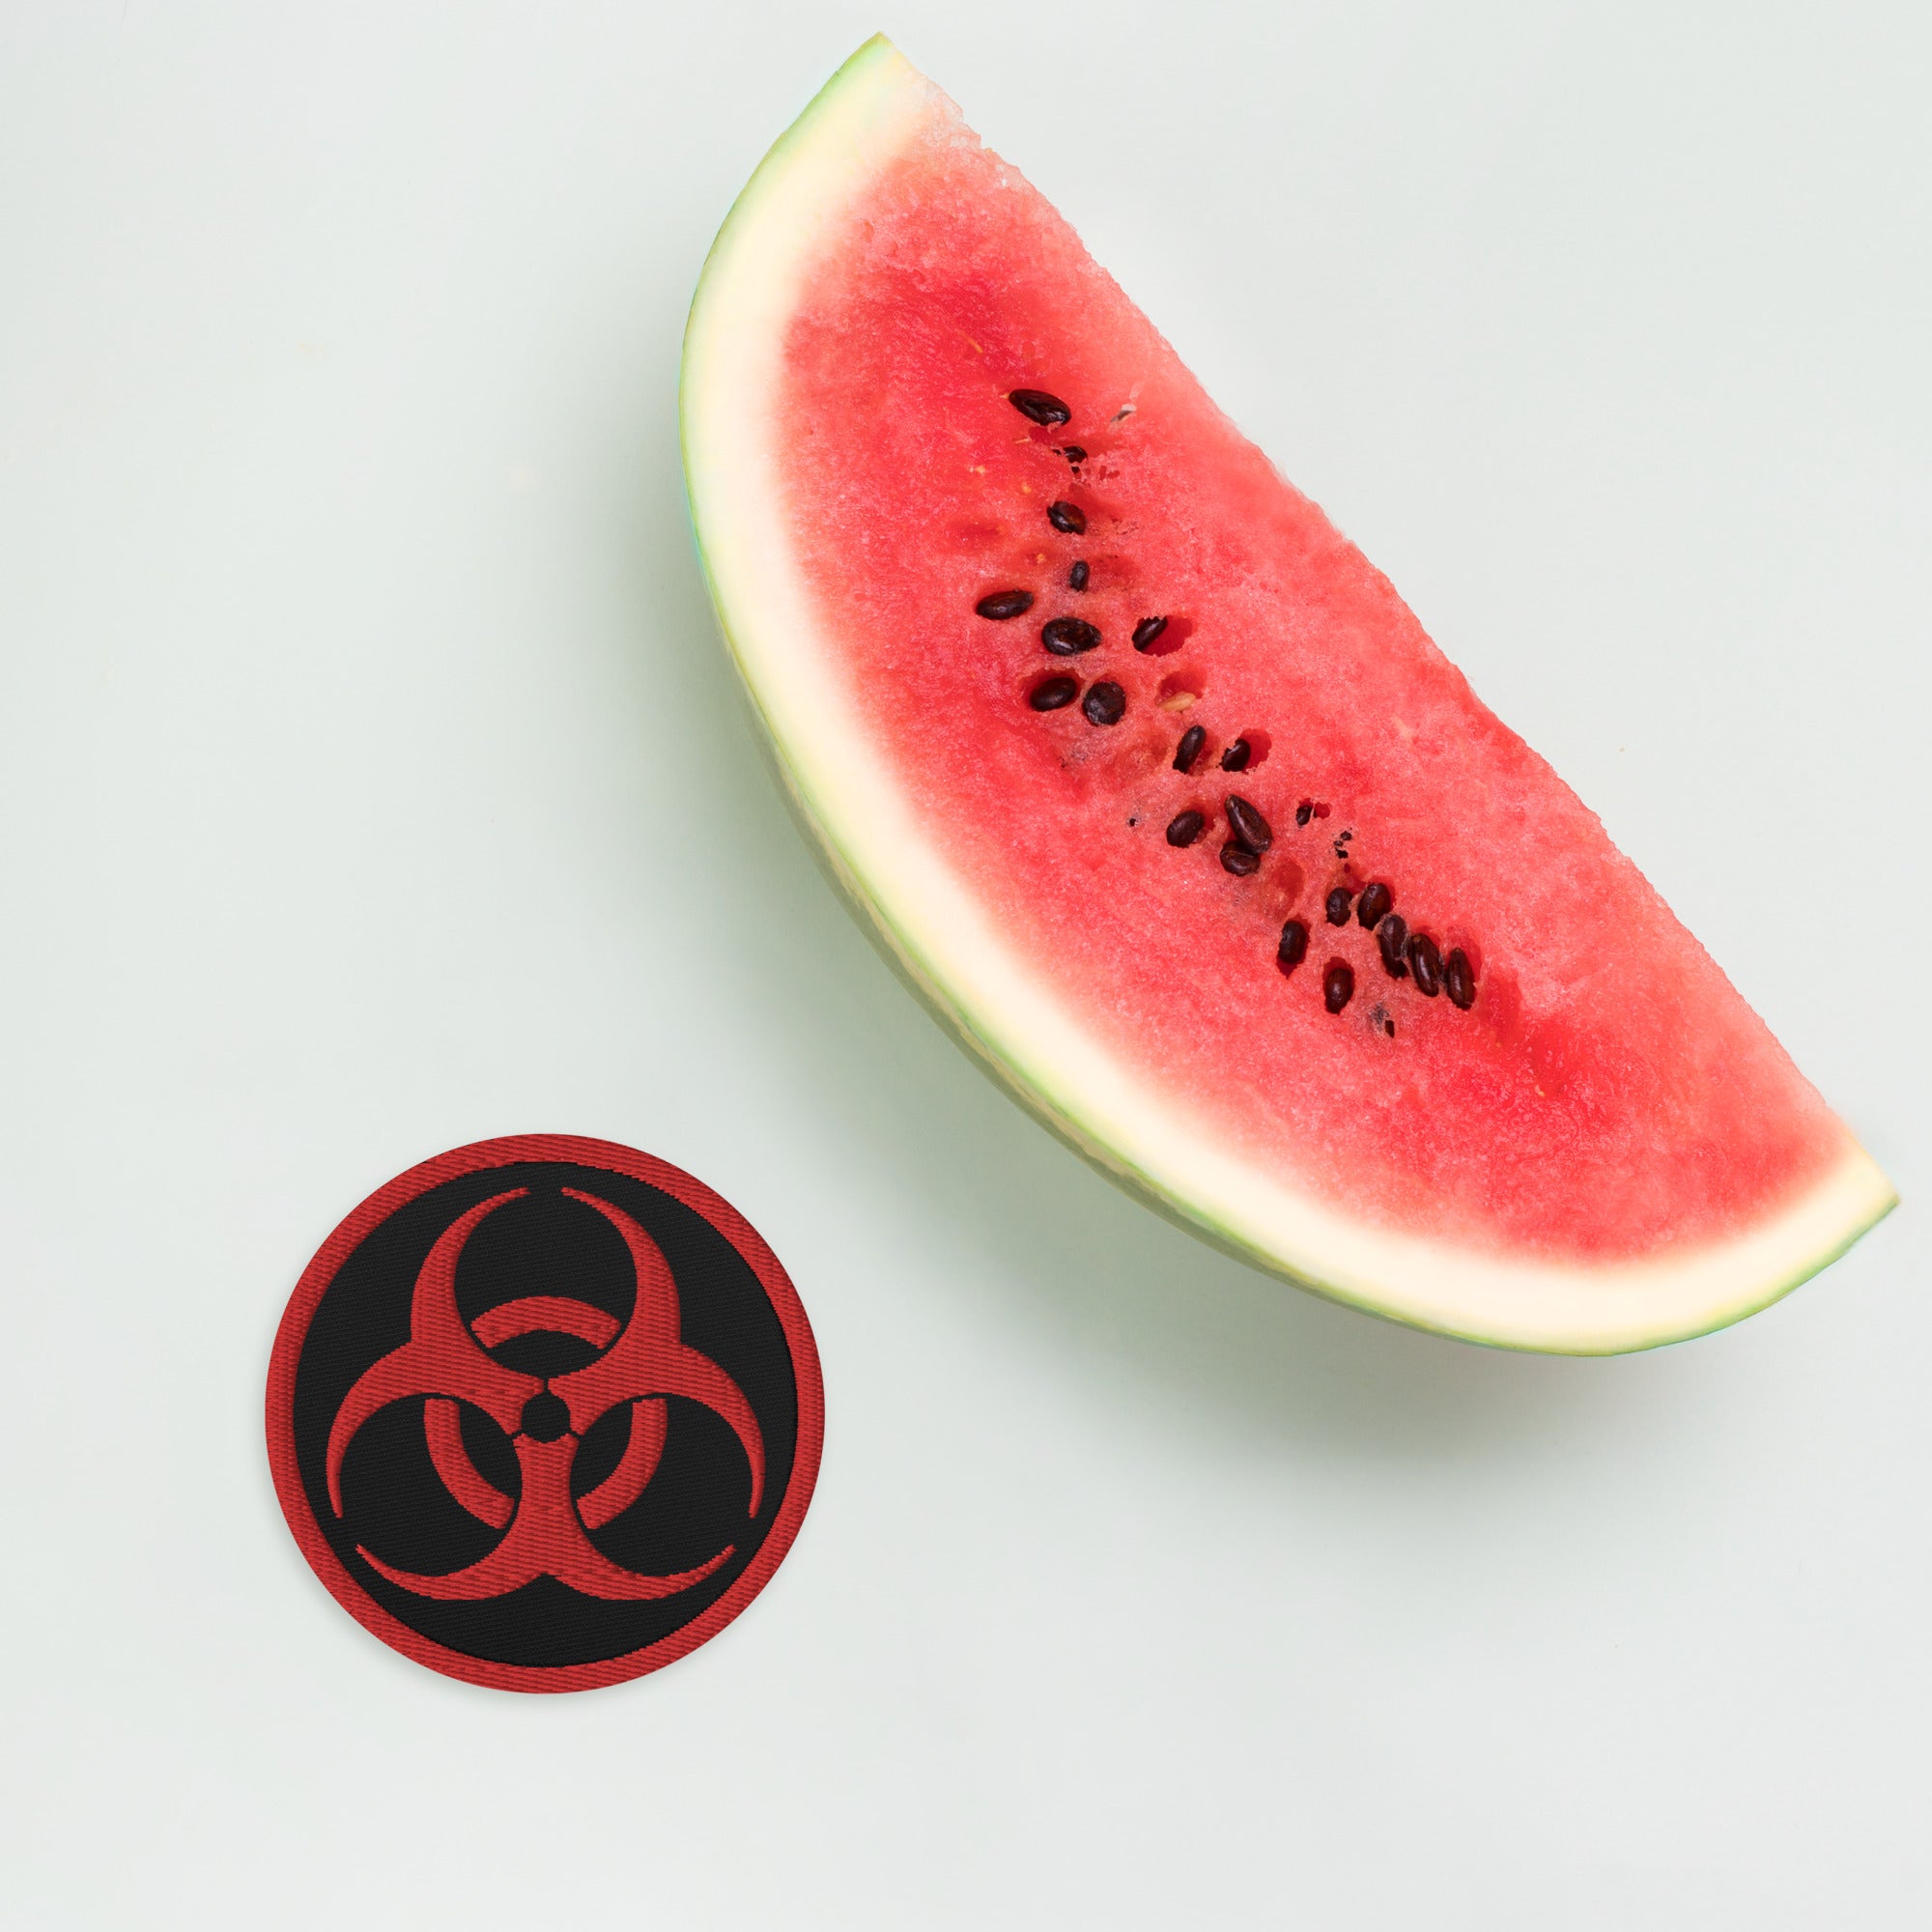 Red Thread Bio Hazard Symbol Warning Sign Embroidered Patch Zombie Apocalypse - Edge of Life Designs